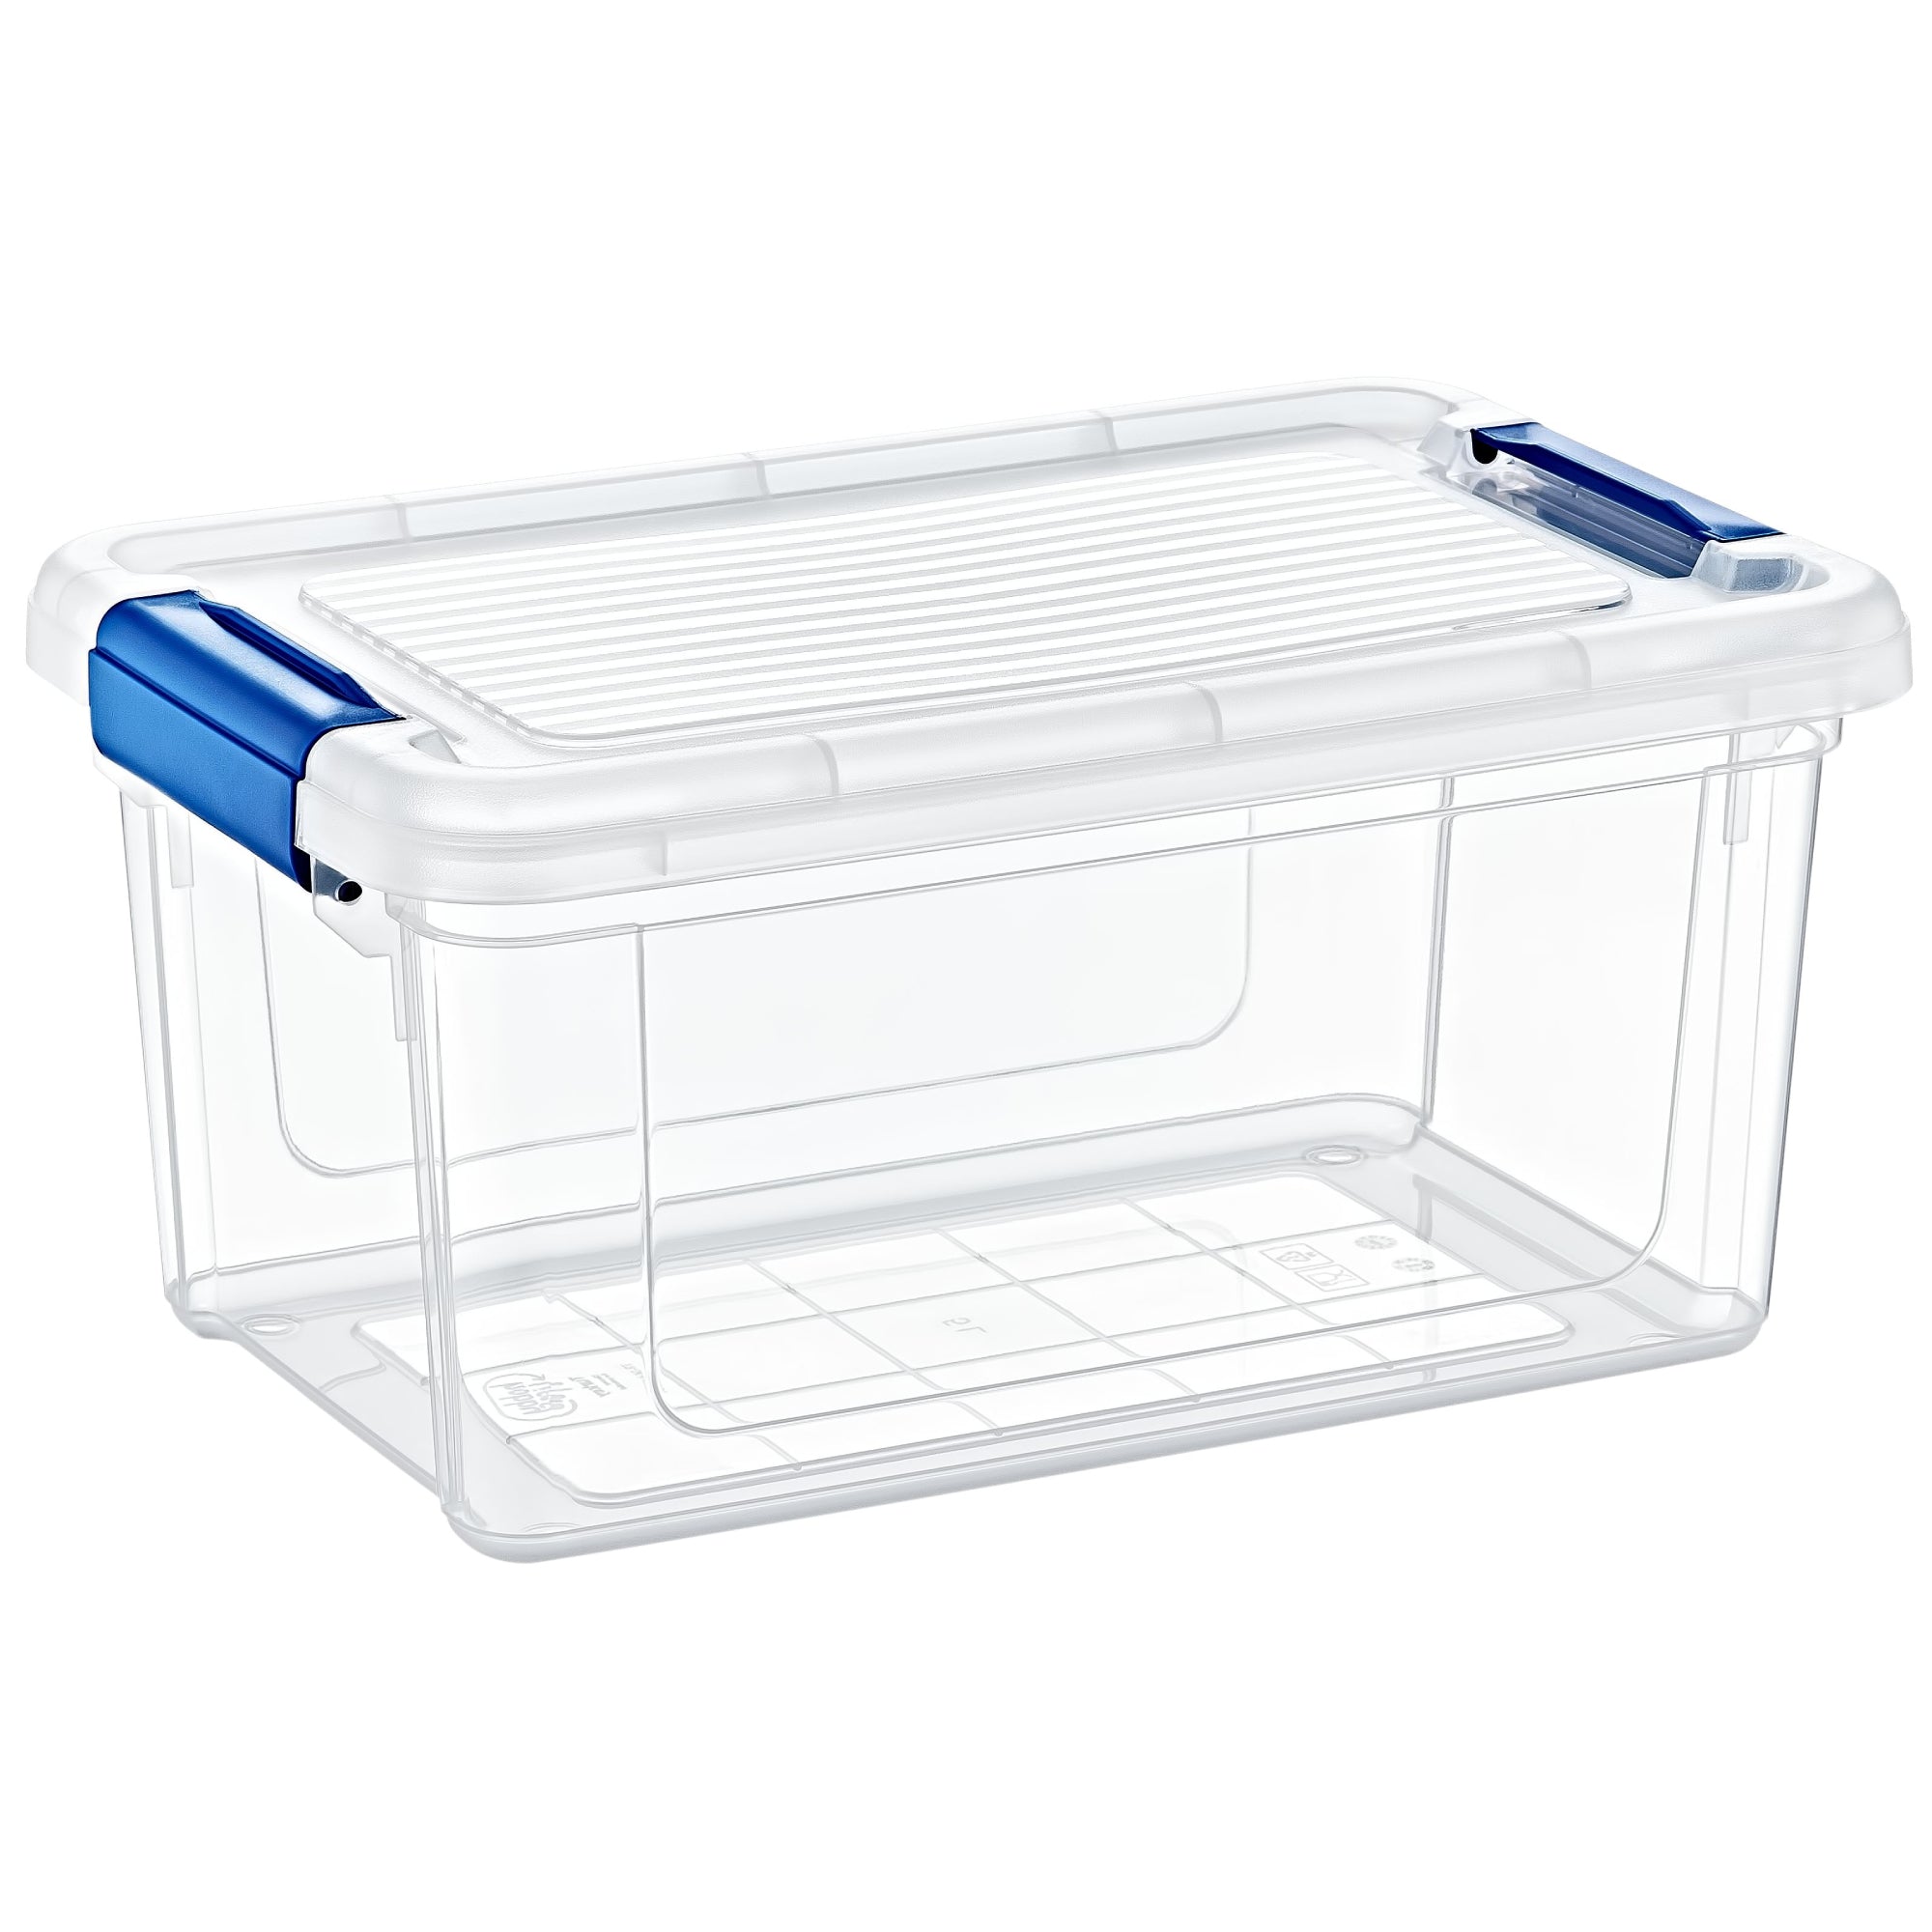 Hobby Life Plastic Storage Utility Container Box 2.5L Stormax Glassy 021220